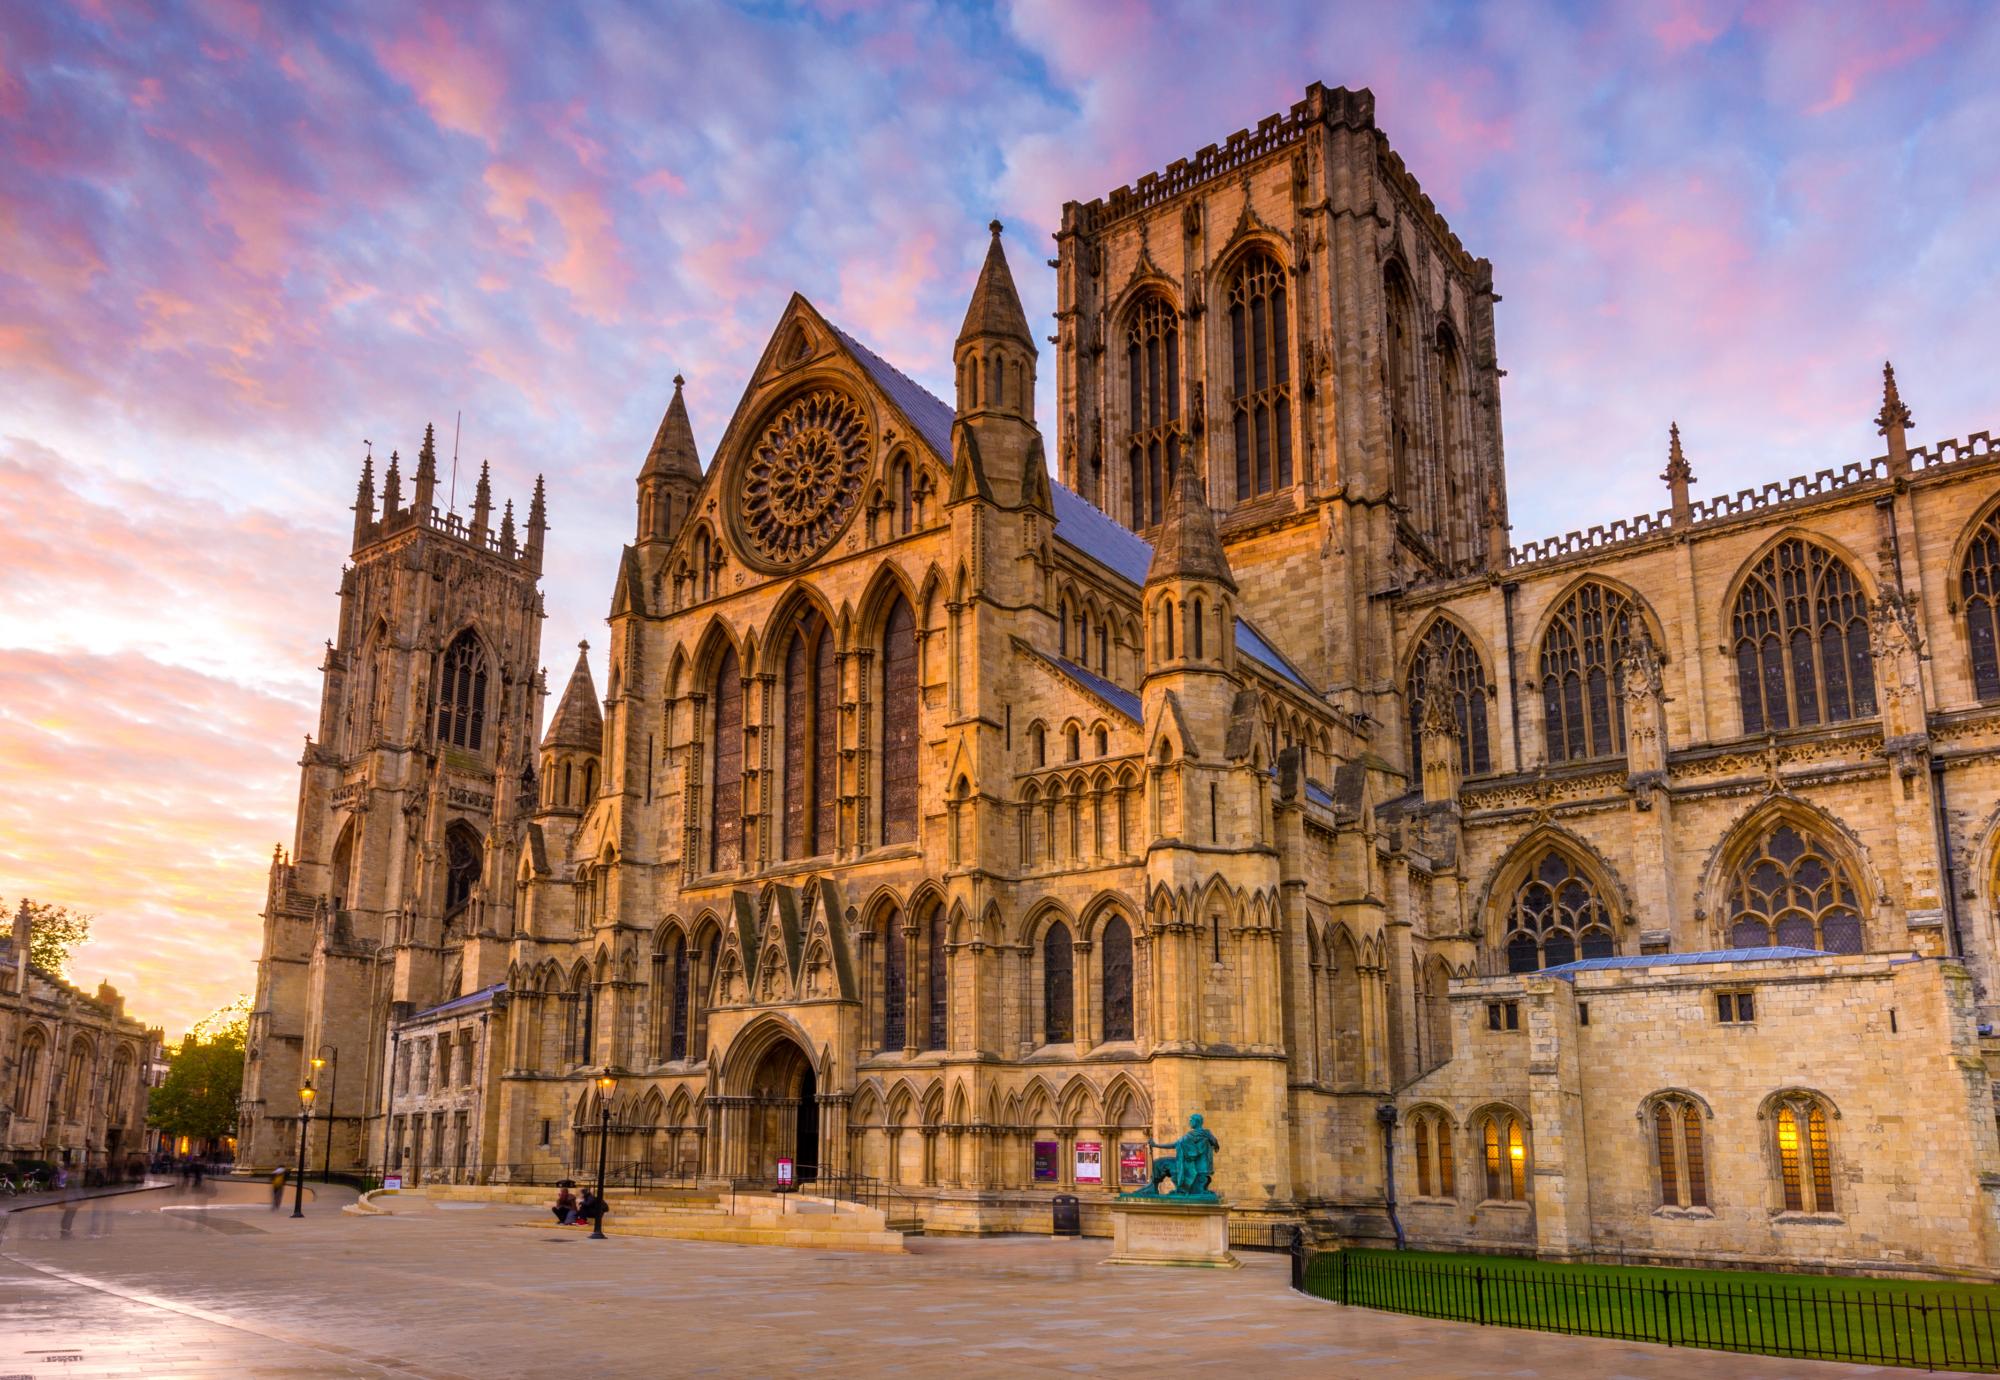 Wide angle view of York Minster at sunset in the city of York, Yorkshire